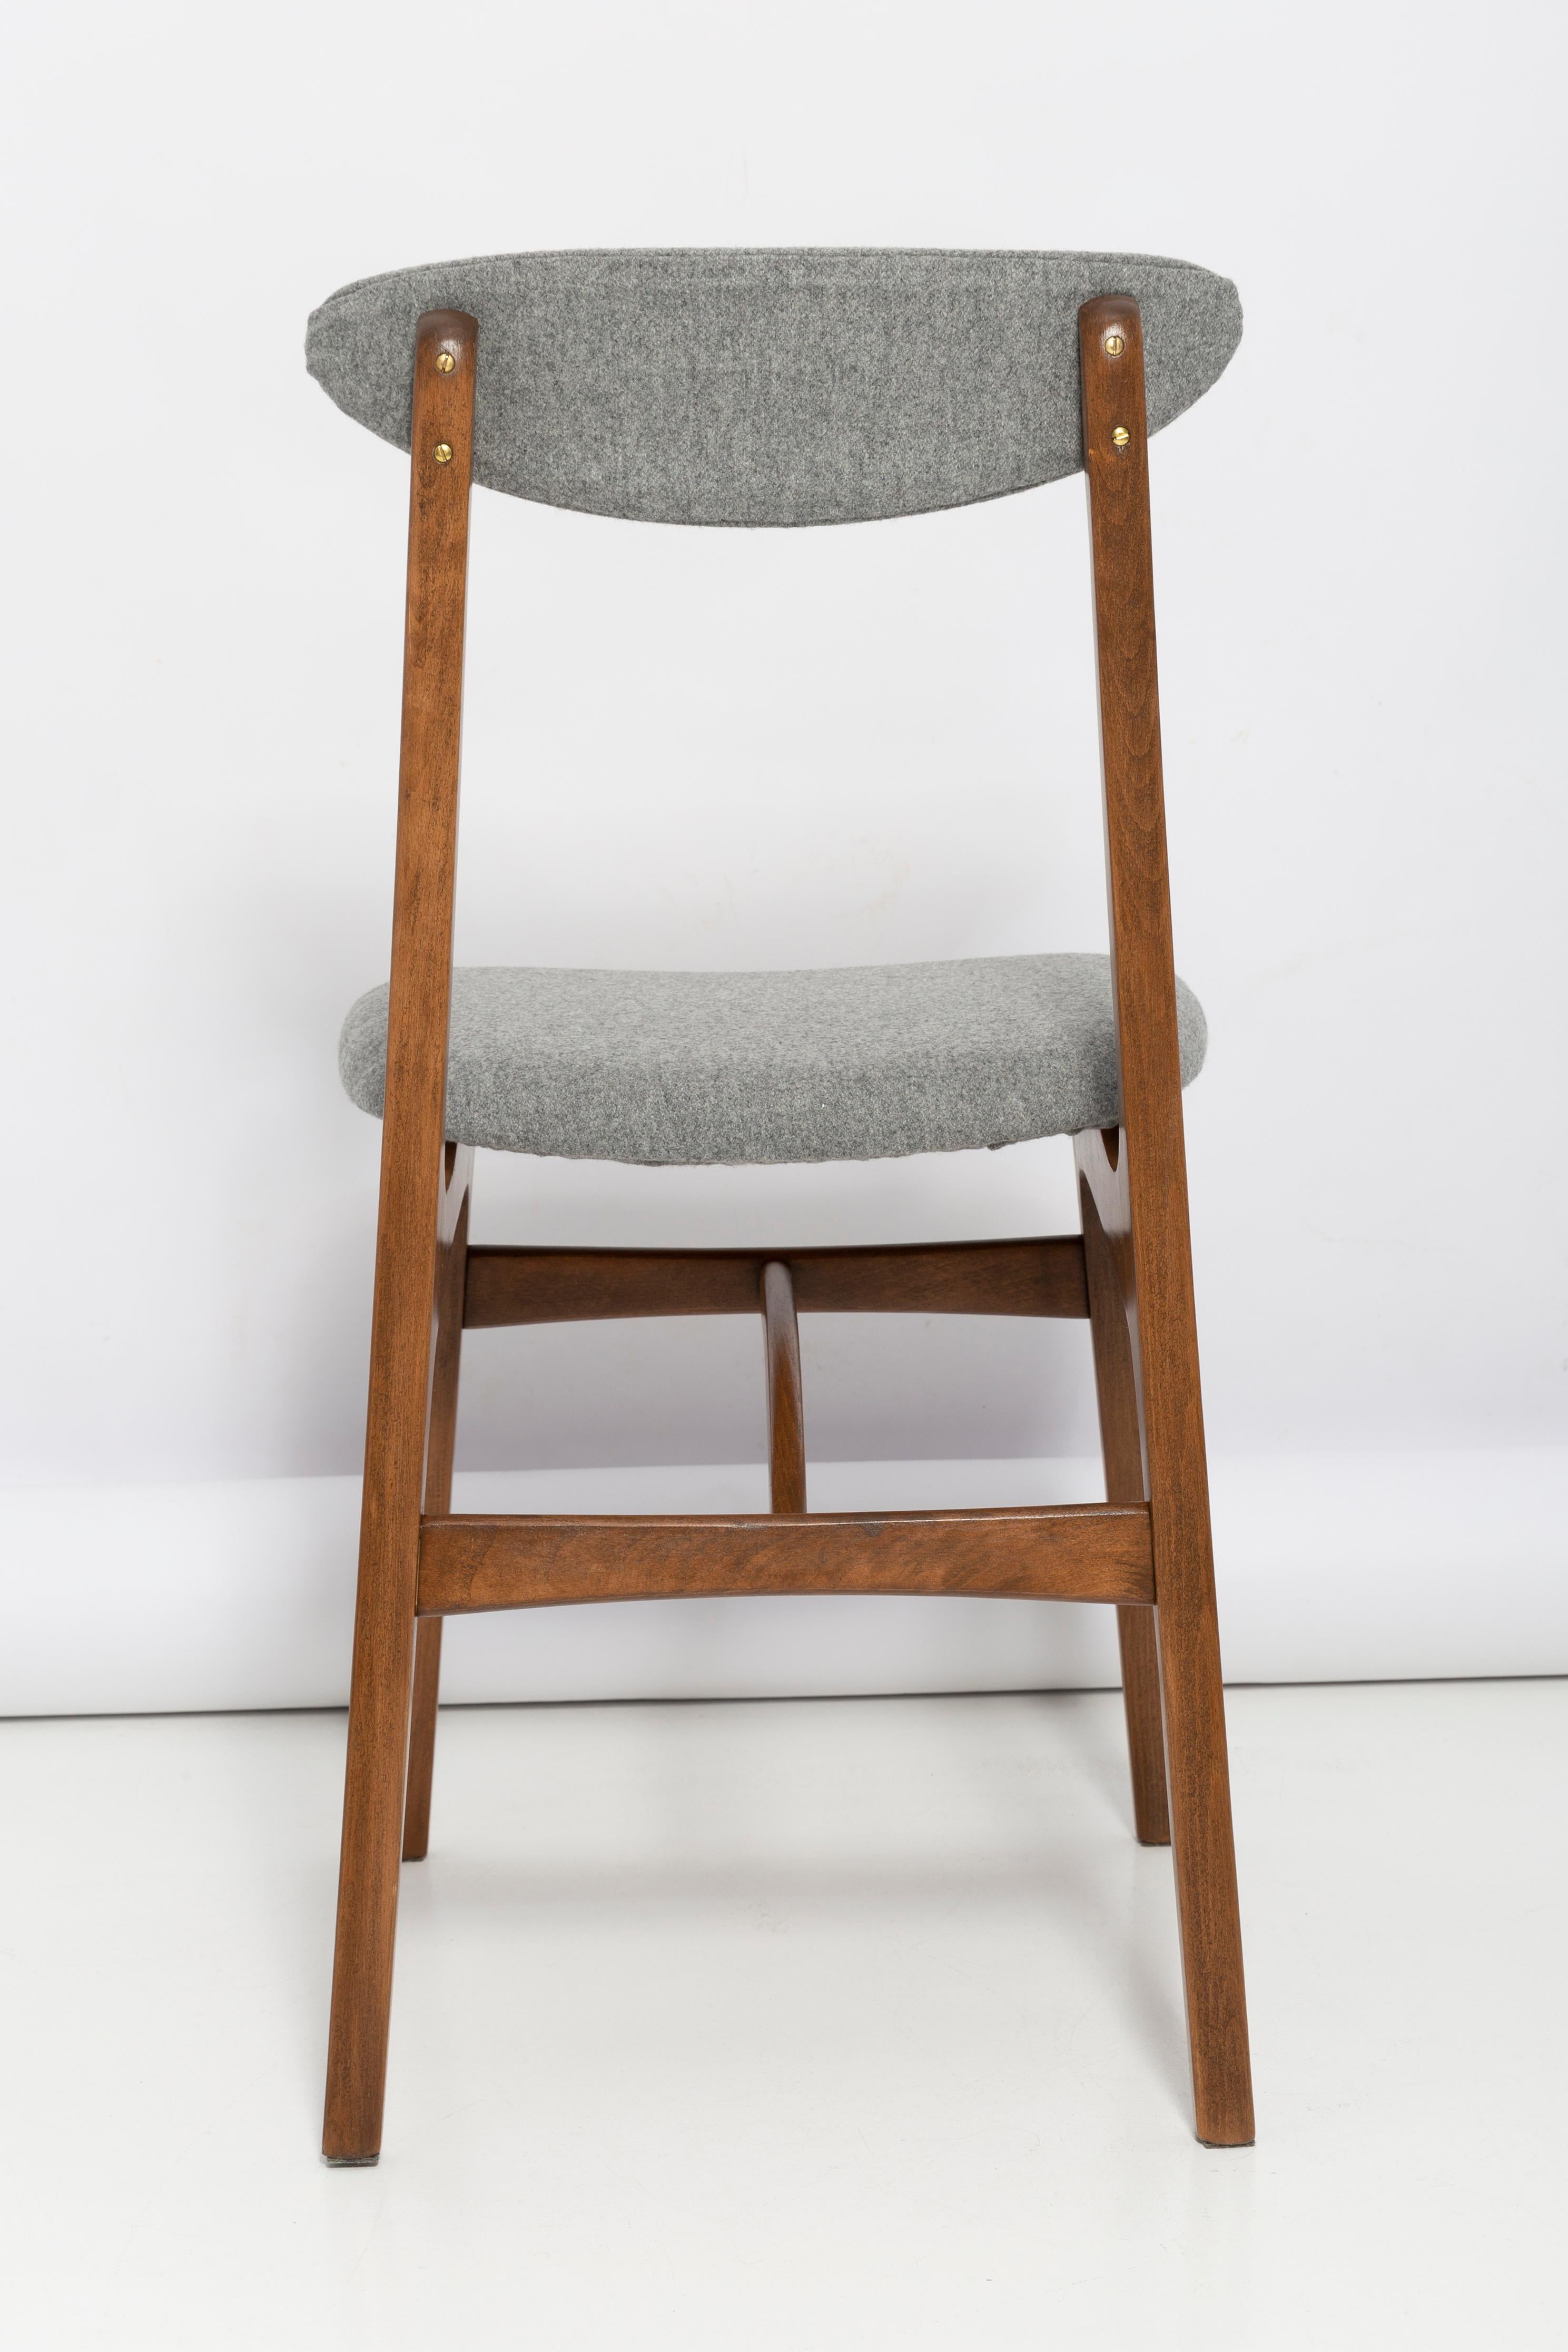 Set of Six Mid Century Gray Wool Chairs by Rajmund Halas, Poland, 1960s For Sale 1